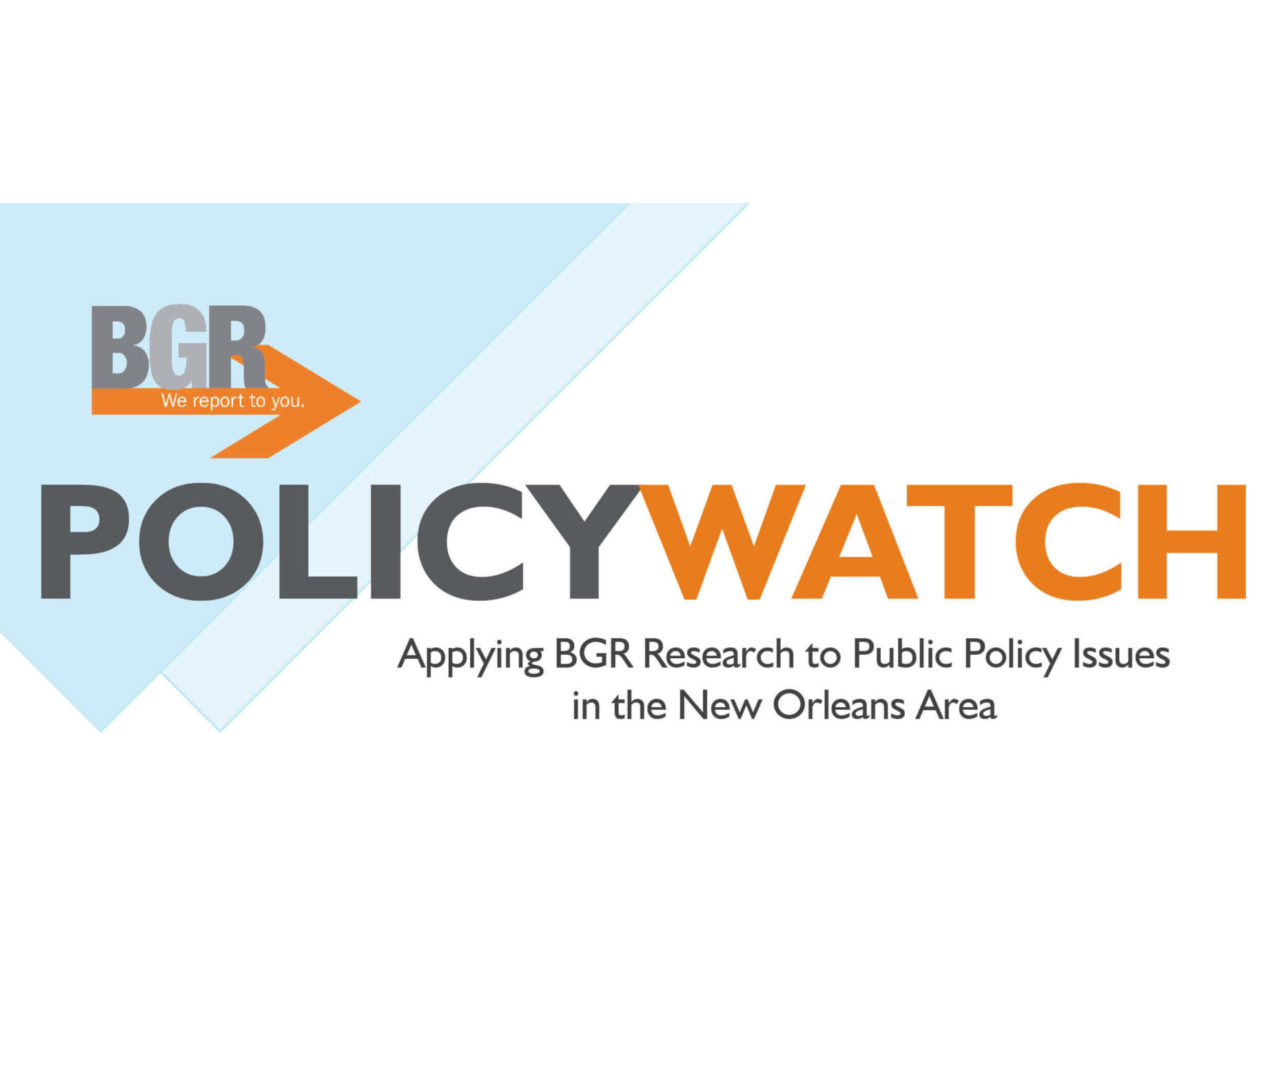 PolicyWatch: Applying BGR Research to Public Policy Issues in the New Orleans Area